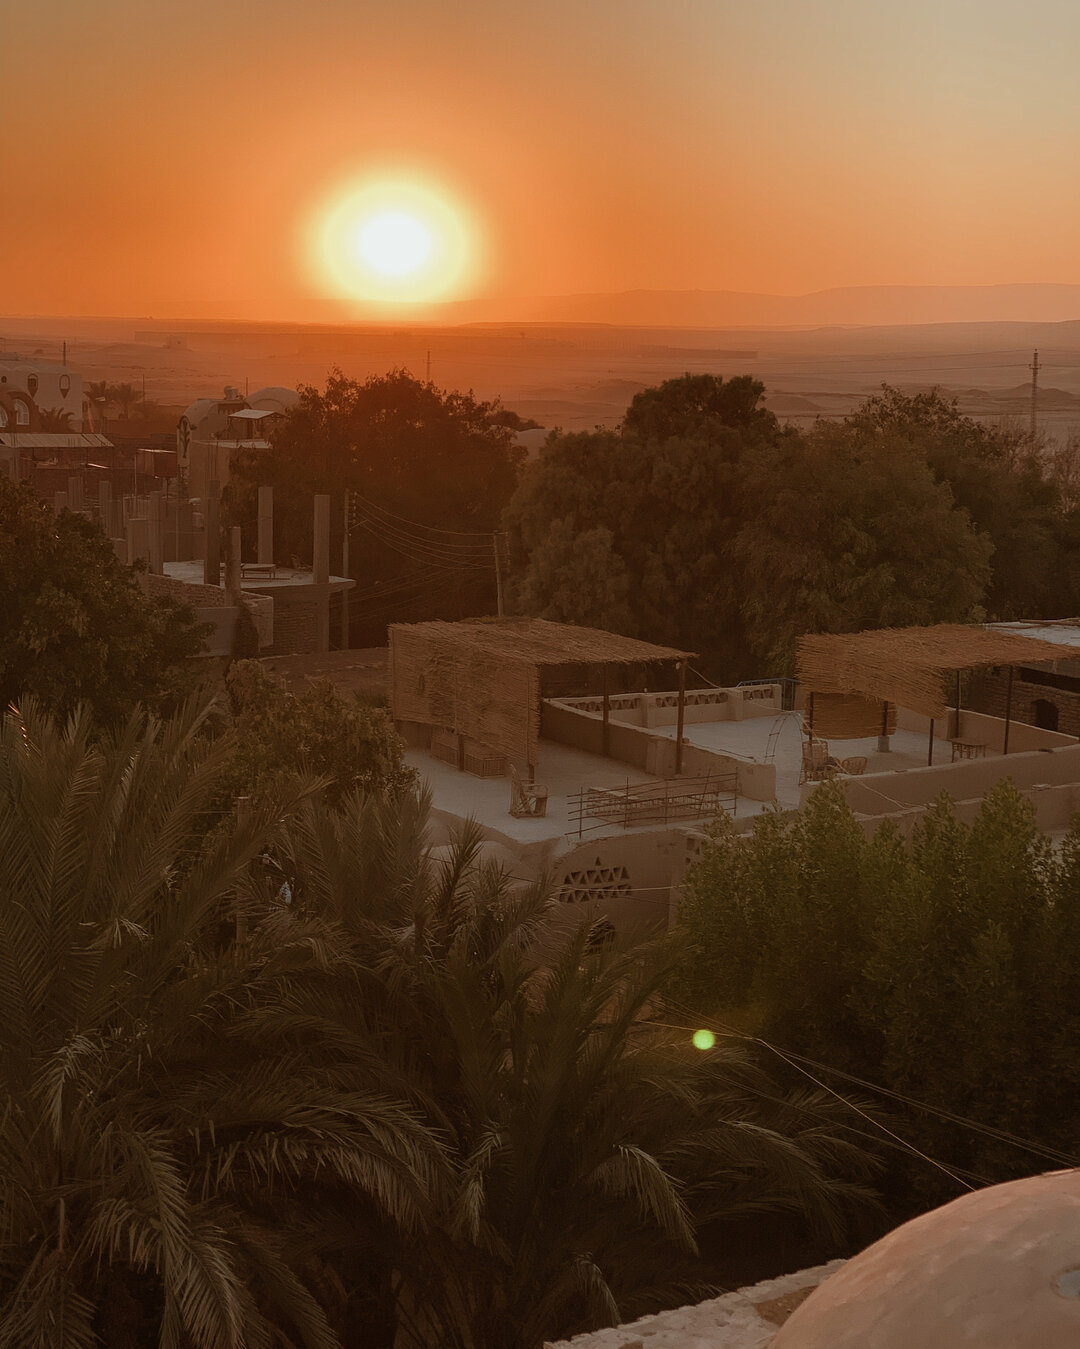 Luxor's Westbank offers some of the most charming places to rest and retreat featuring @beitsabee run by the owner of @nourelnil, the @marsam_hotel famous amongst egyptologists, Nour El Balad (new), @habuhotelecolodge and @moudira_hotel. Most within 